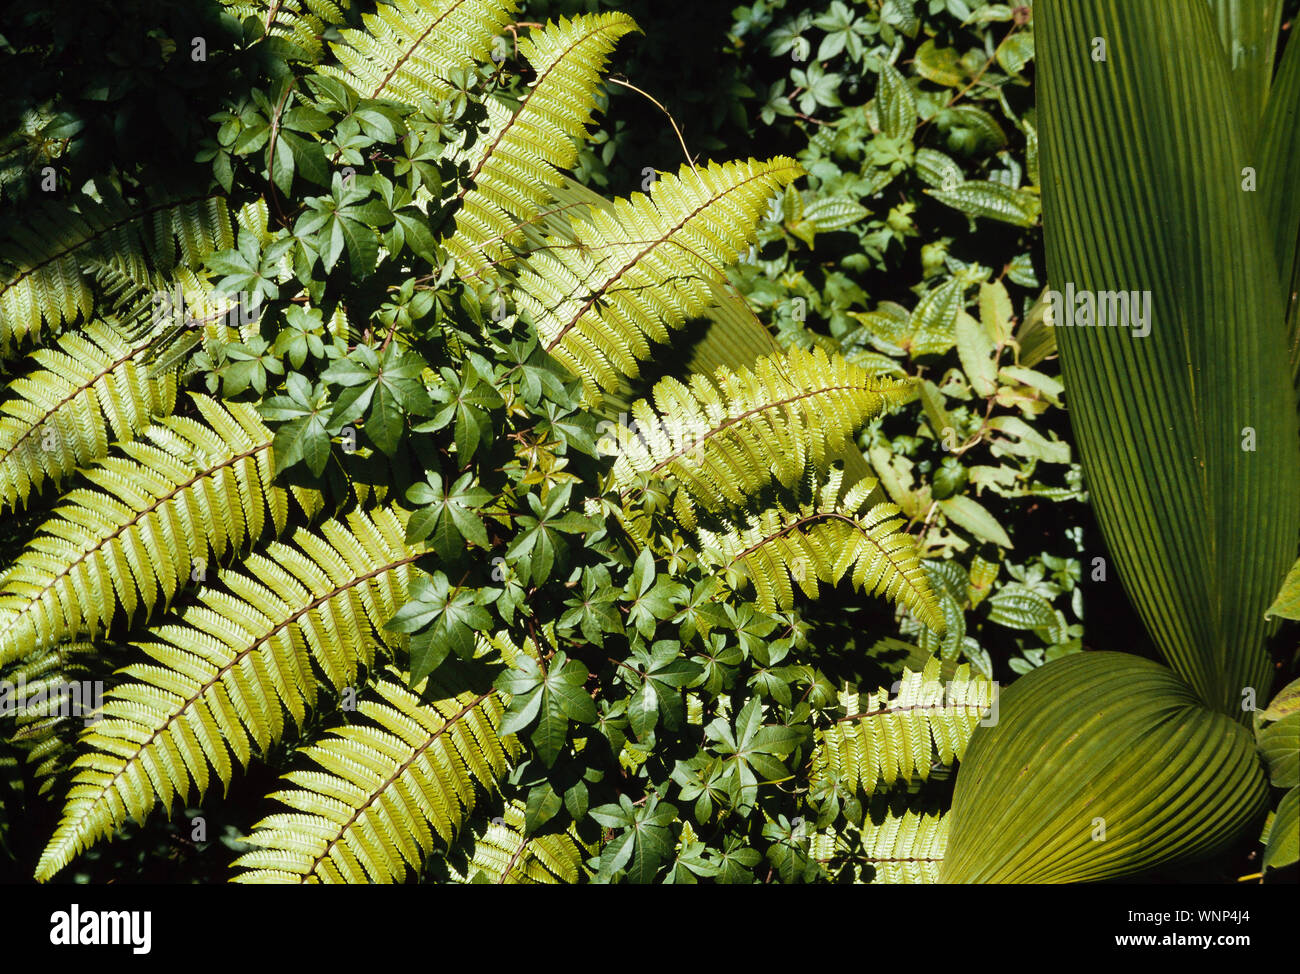 Rainforest tropical mixed foilage, ferns, climbers Stock Photo